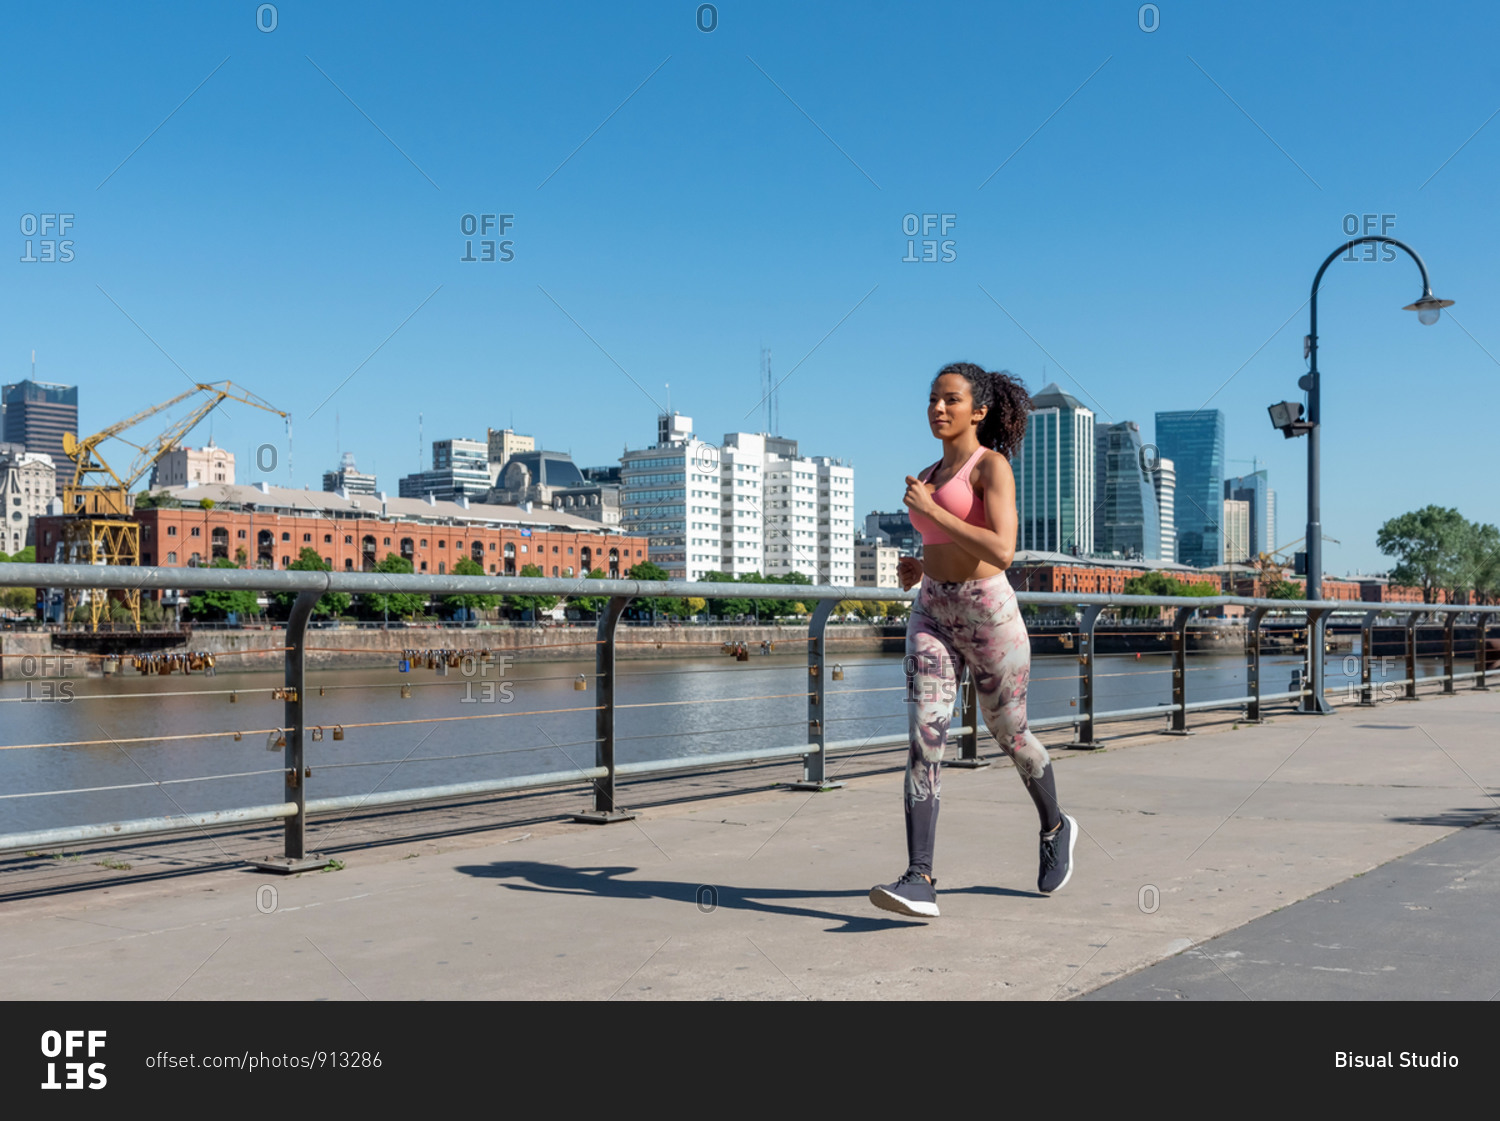 Latin American woman with a pink outfit jogging in Puerto Madero, Buenos Aires